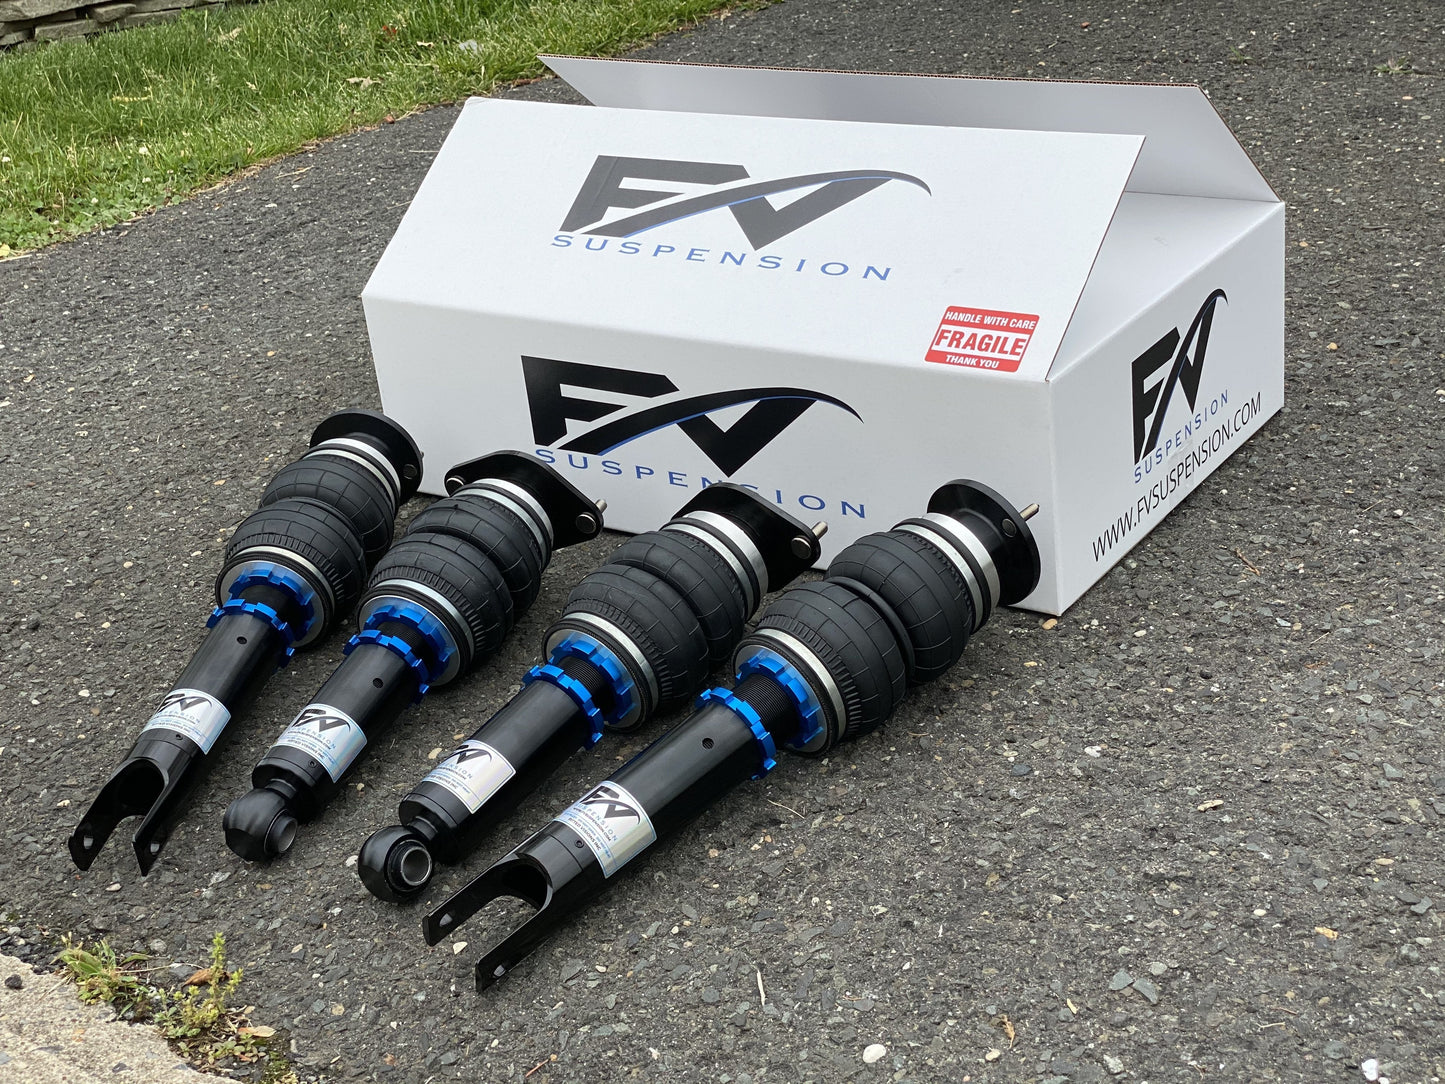 FV Suspension 3H Tier 3 Complete Air Ride kit for 79-93 Ford Mustang - Full Kit